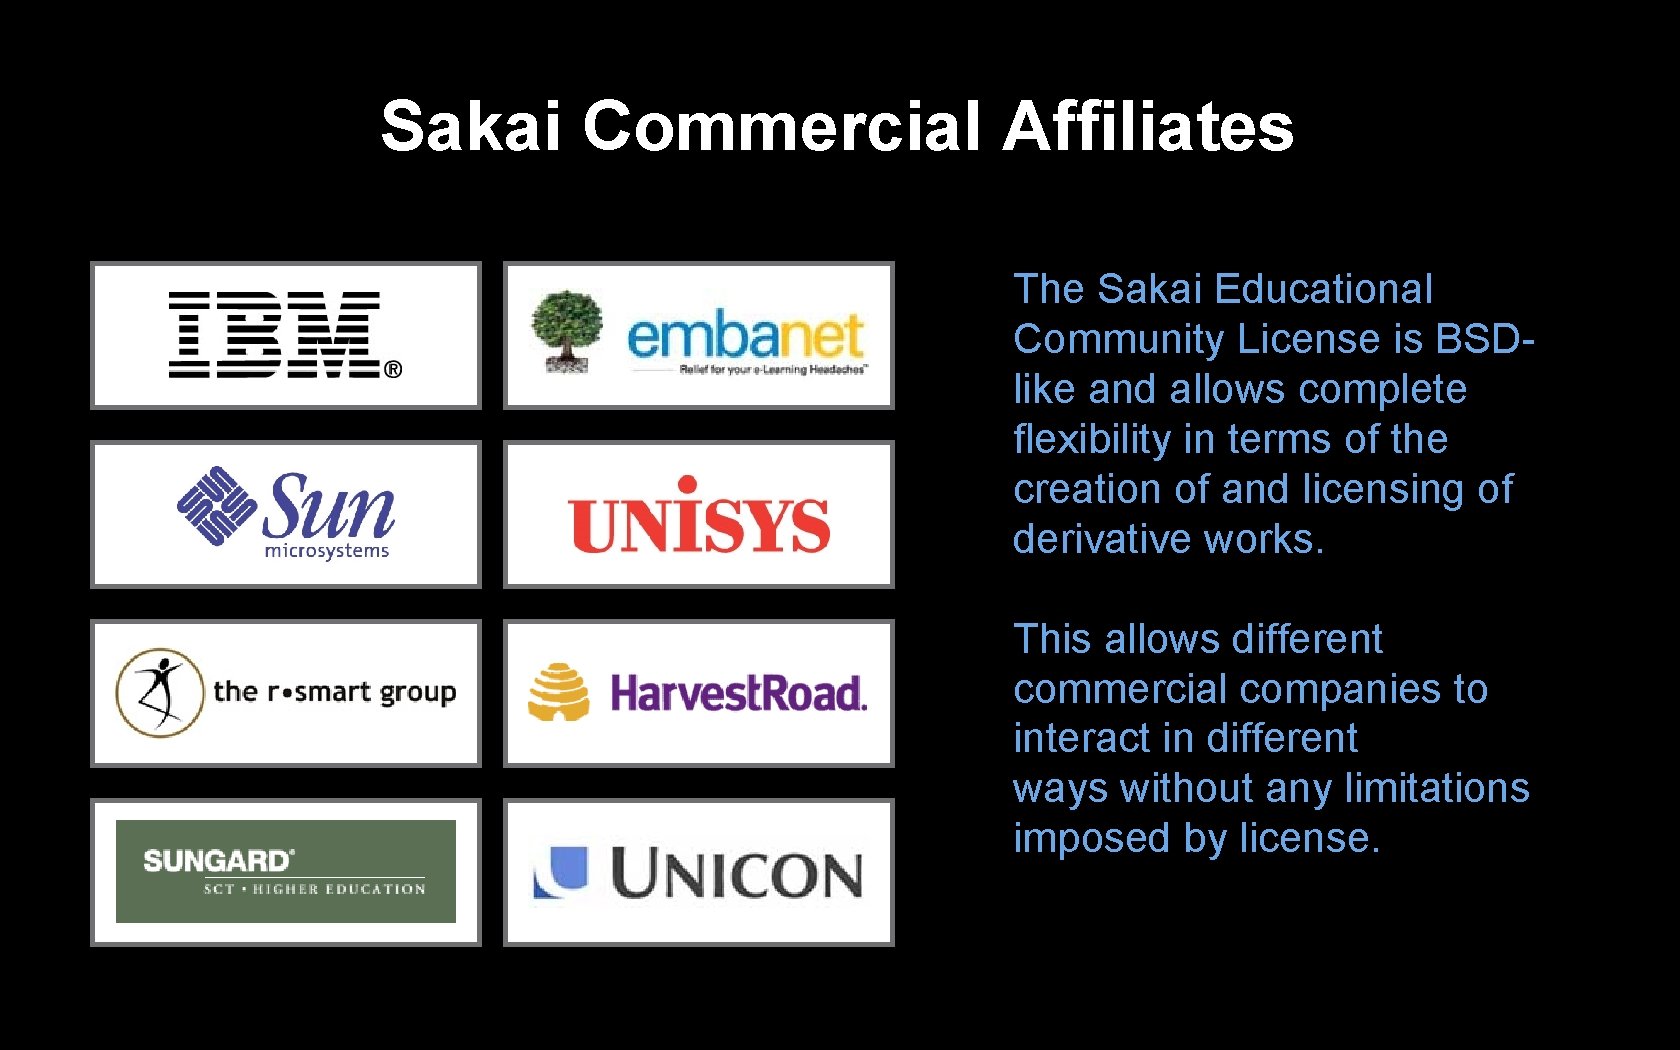 Sakai Commercial Affiliates The Sakai Educational Community License is BSDlike and allows complete flexibility